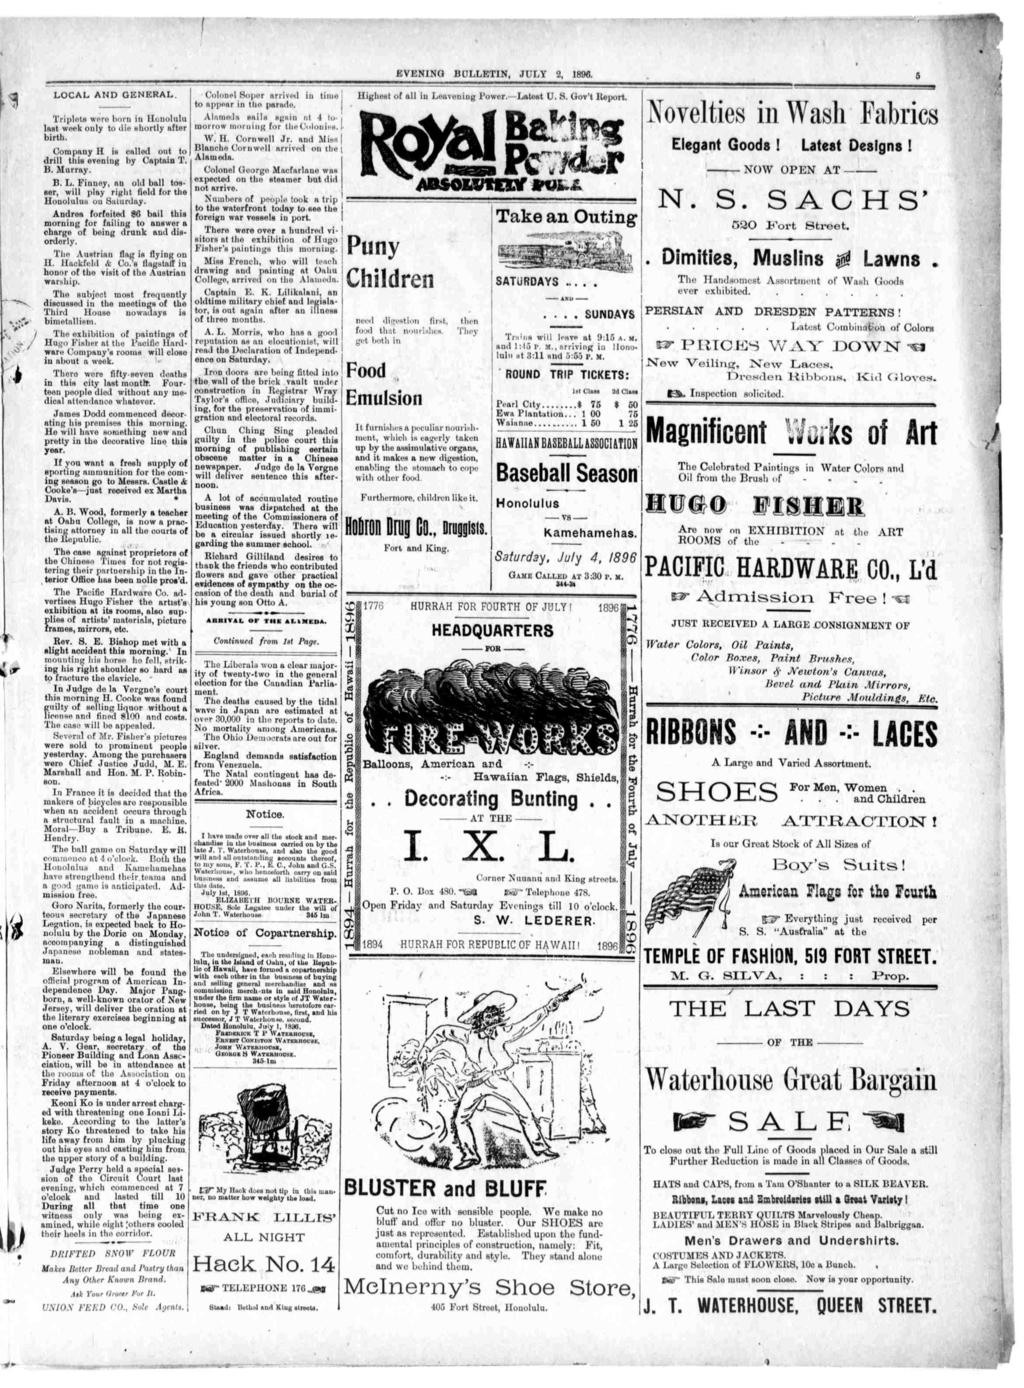 V EVENING BULLETIN JULY 2 189G Kv Sk b LOCAL AND GENERAL Trples woro born u onolulu las week only o de shorly afer brh Copany s culled ou o drll hs ovenng by Capan T 13 urray B; oseo L Fnney an old